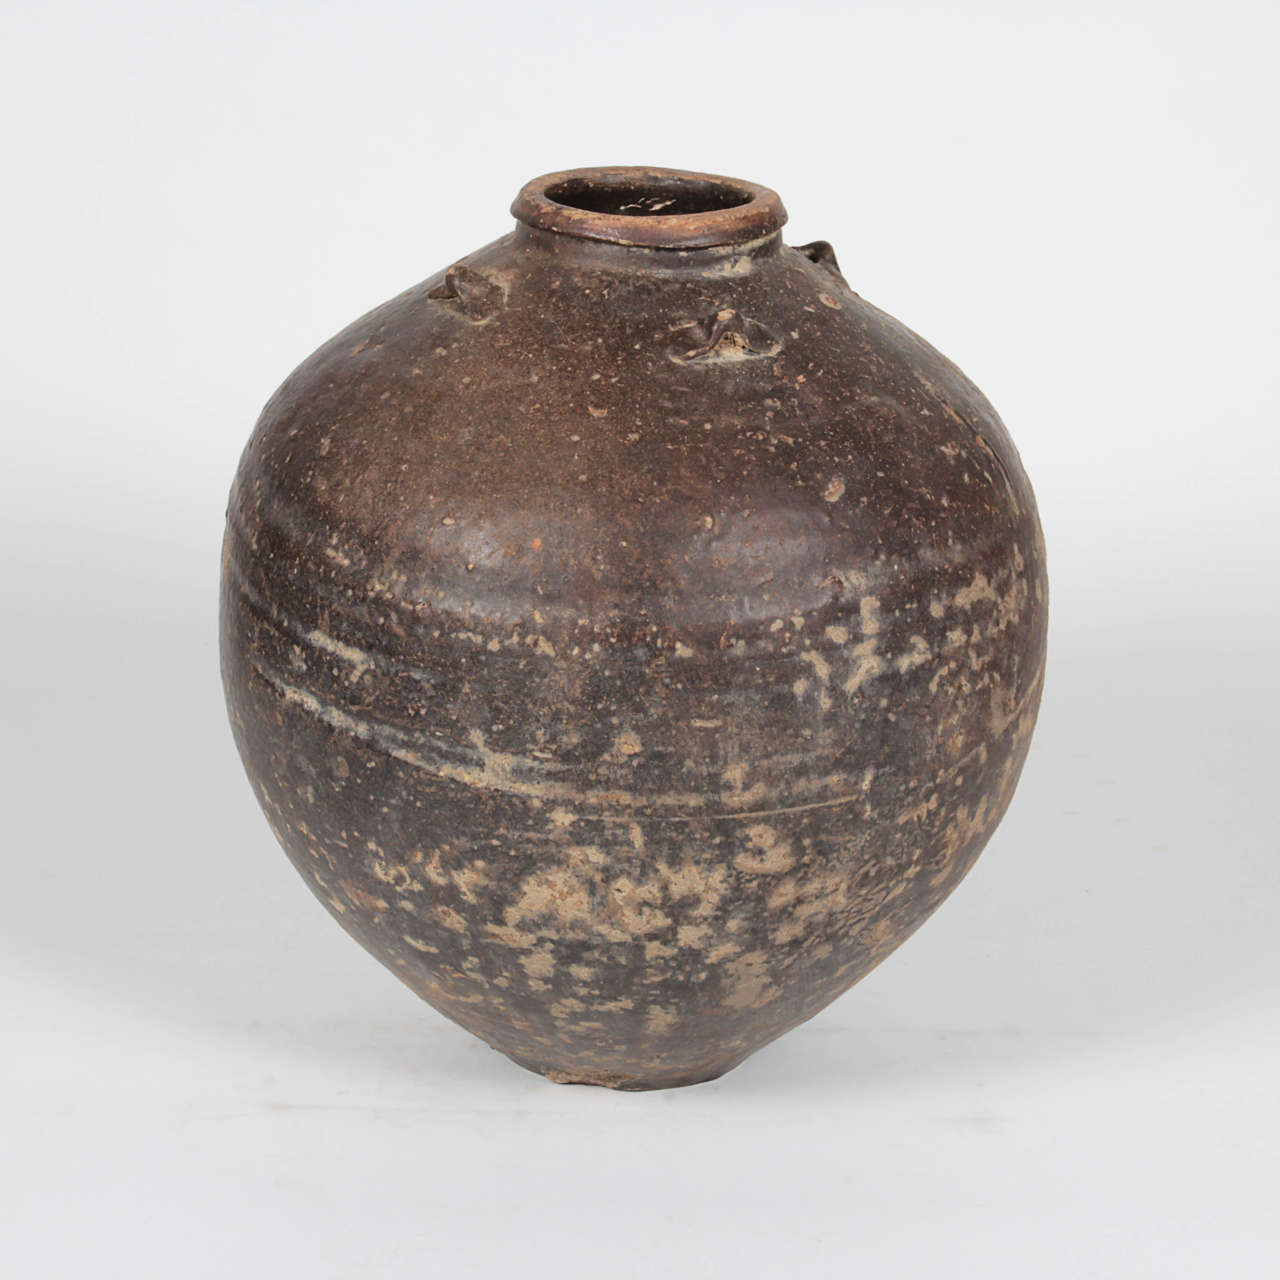 Antique round ceramic pot from Indonesia. Personally selected by Donna Karan for her Urban Zen brand.